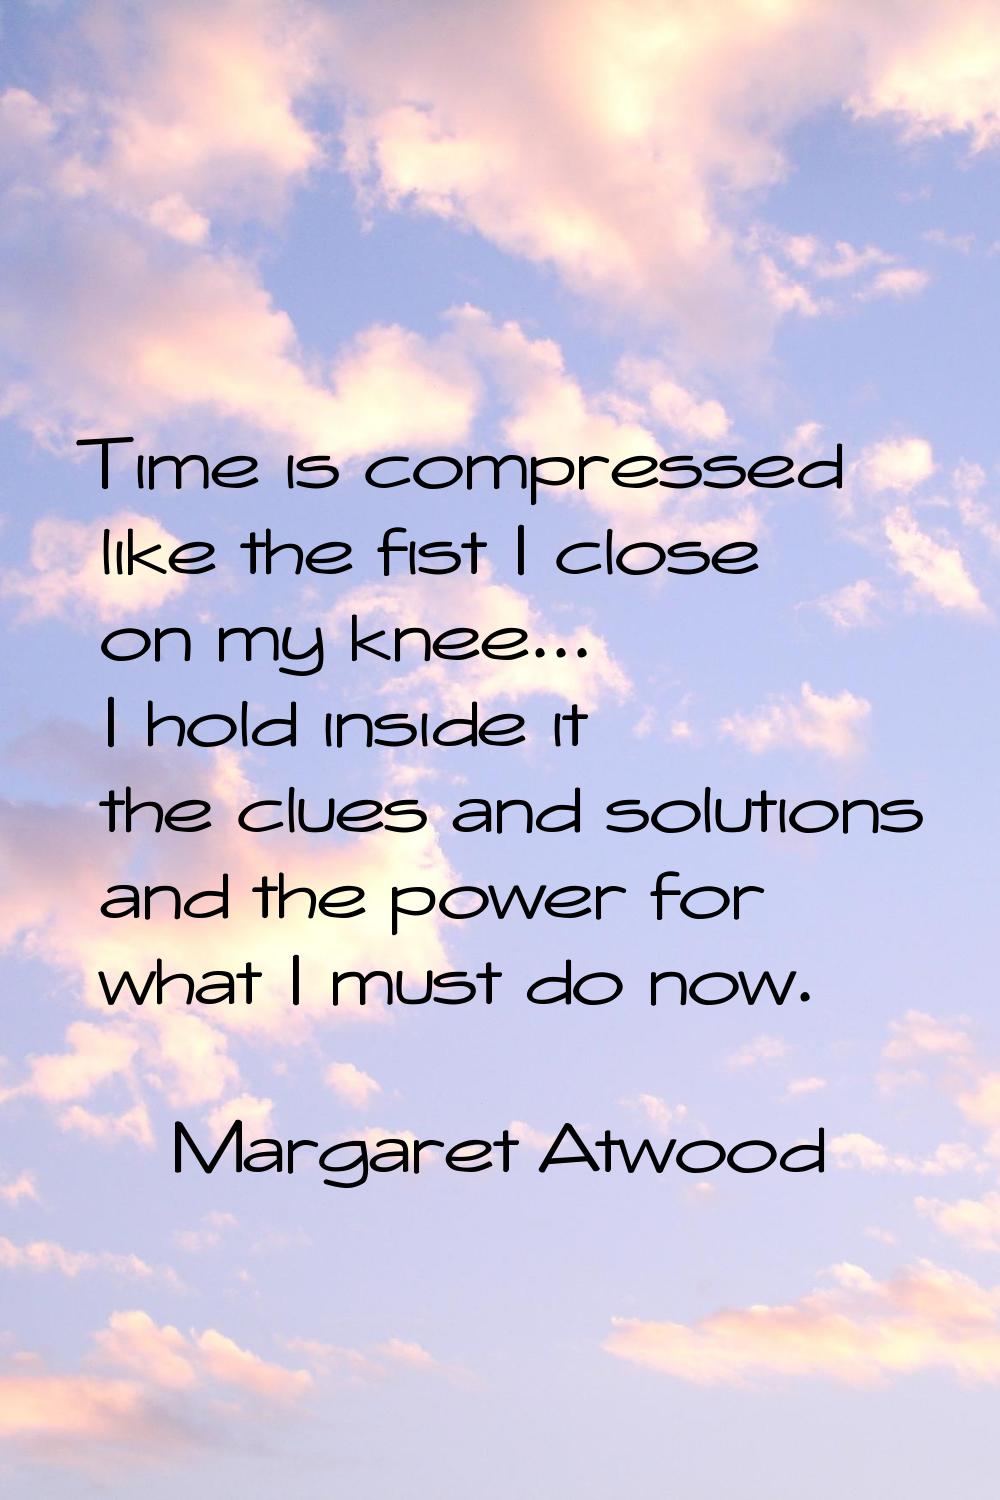 Time is compressed like the fist I close on my knee... I hold inside it the clues and solutions and